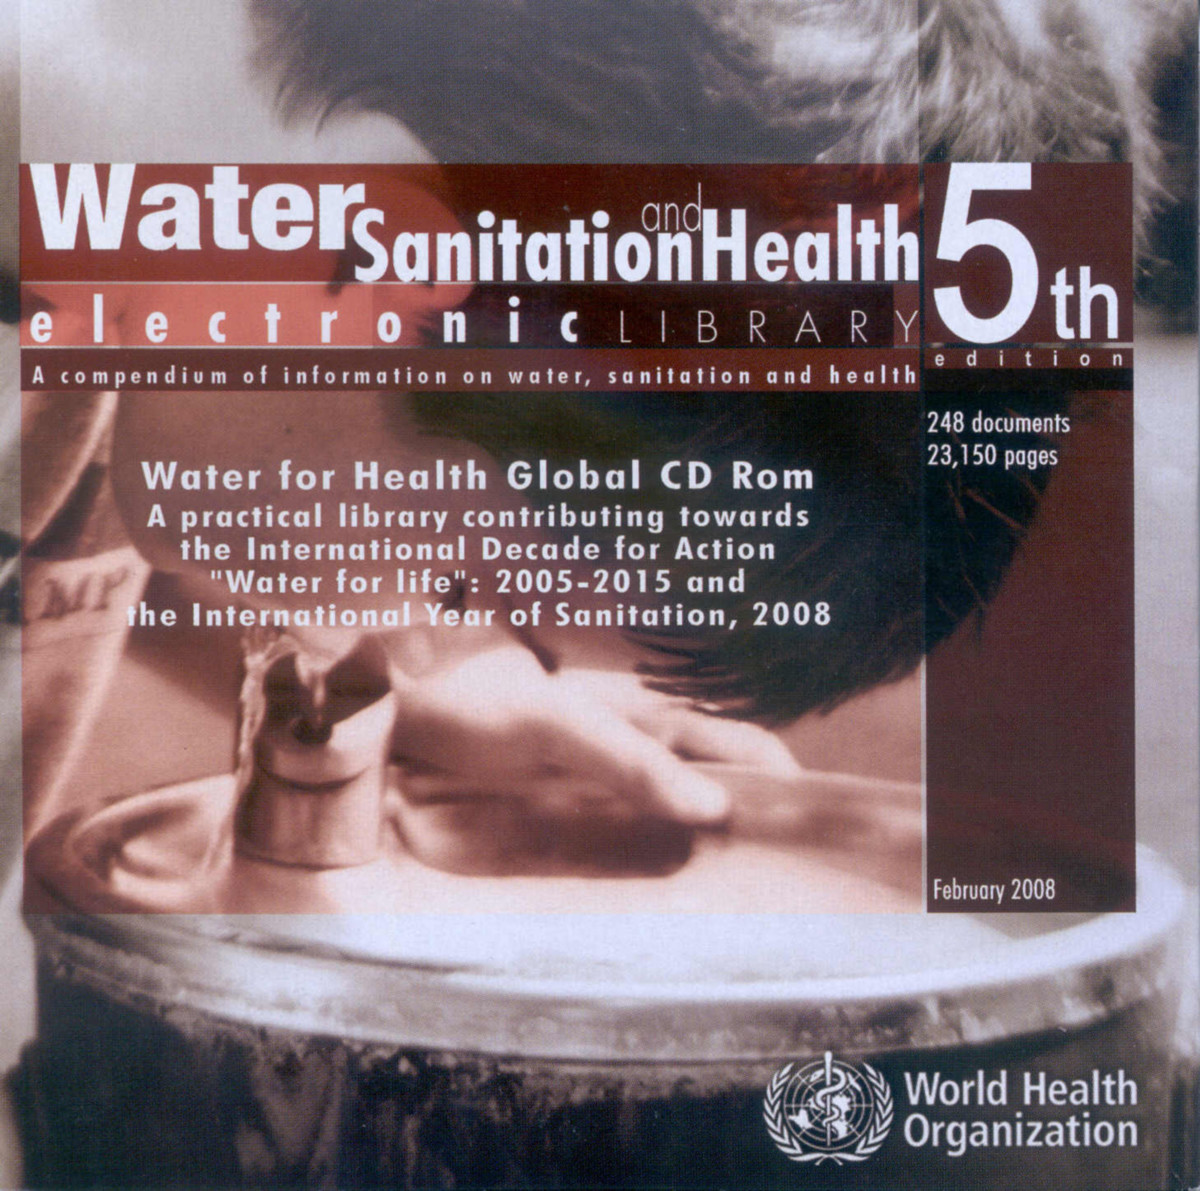 WSH—Water, Sanitation and Health Electronic Library